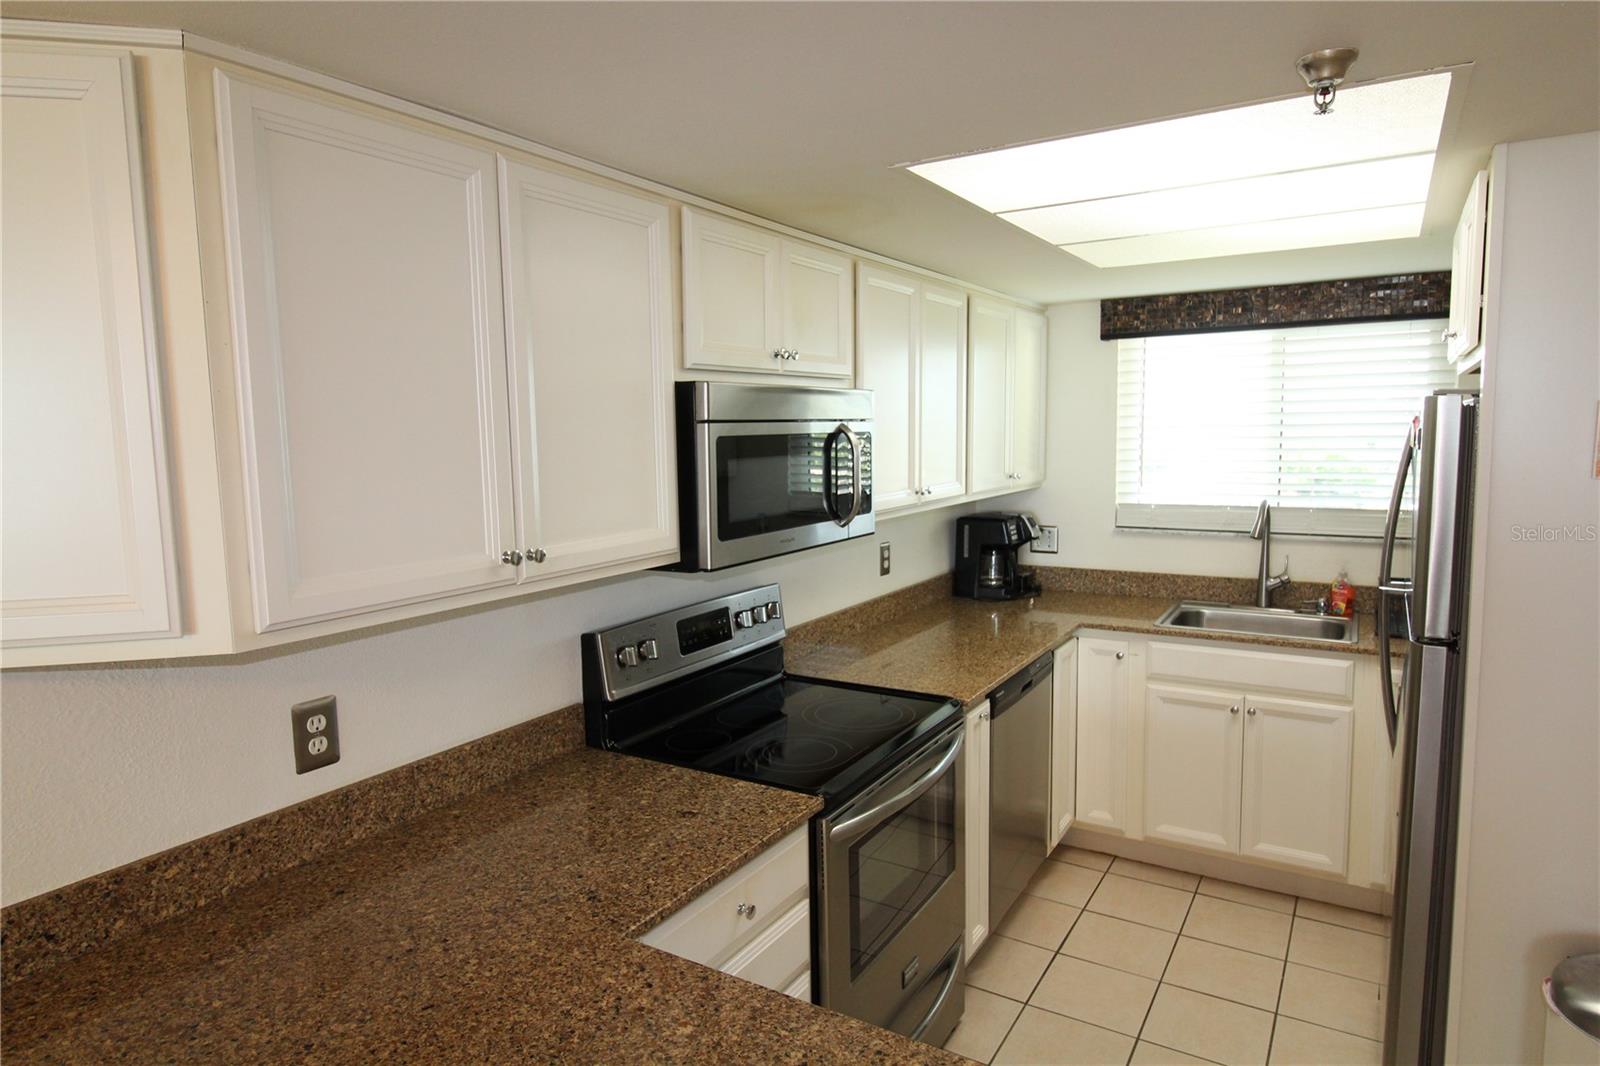 Kitchen with Grnaite Counters and Stainless Steel Appliances